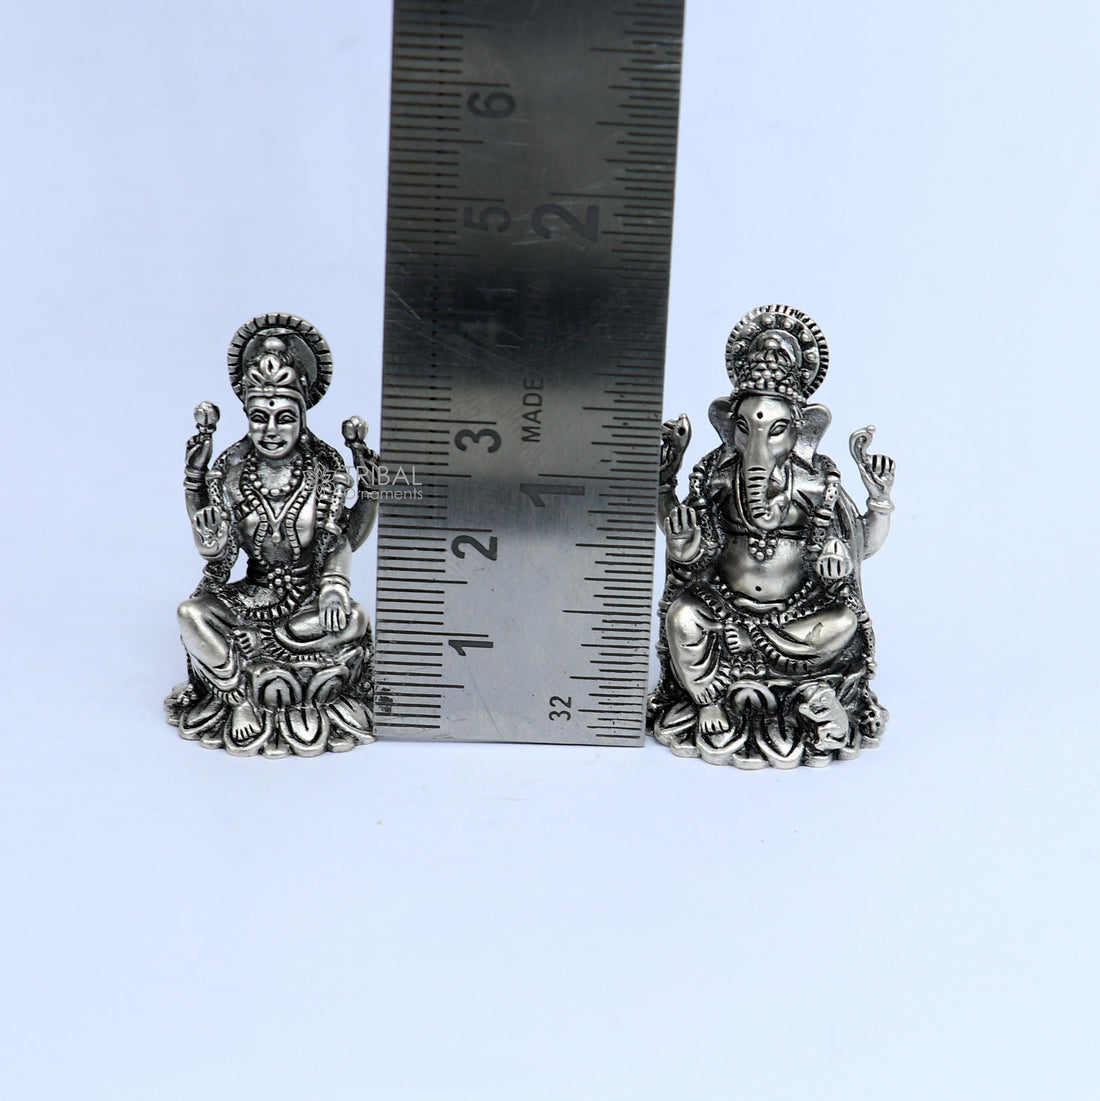 1.5" 925 Sterling silver Lakshmi and Ganesha statue, puja article figurine, Diwali puja brings joy, hope, and wealth to the owners art720 - TRIBAL ORNAMENTS